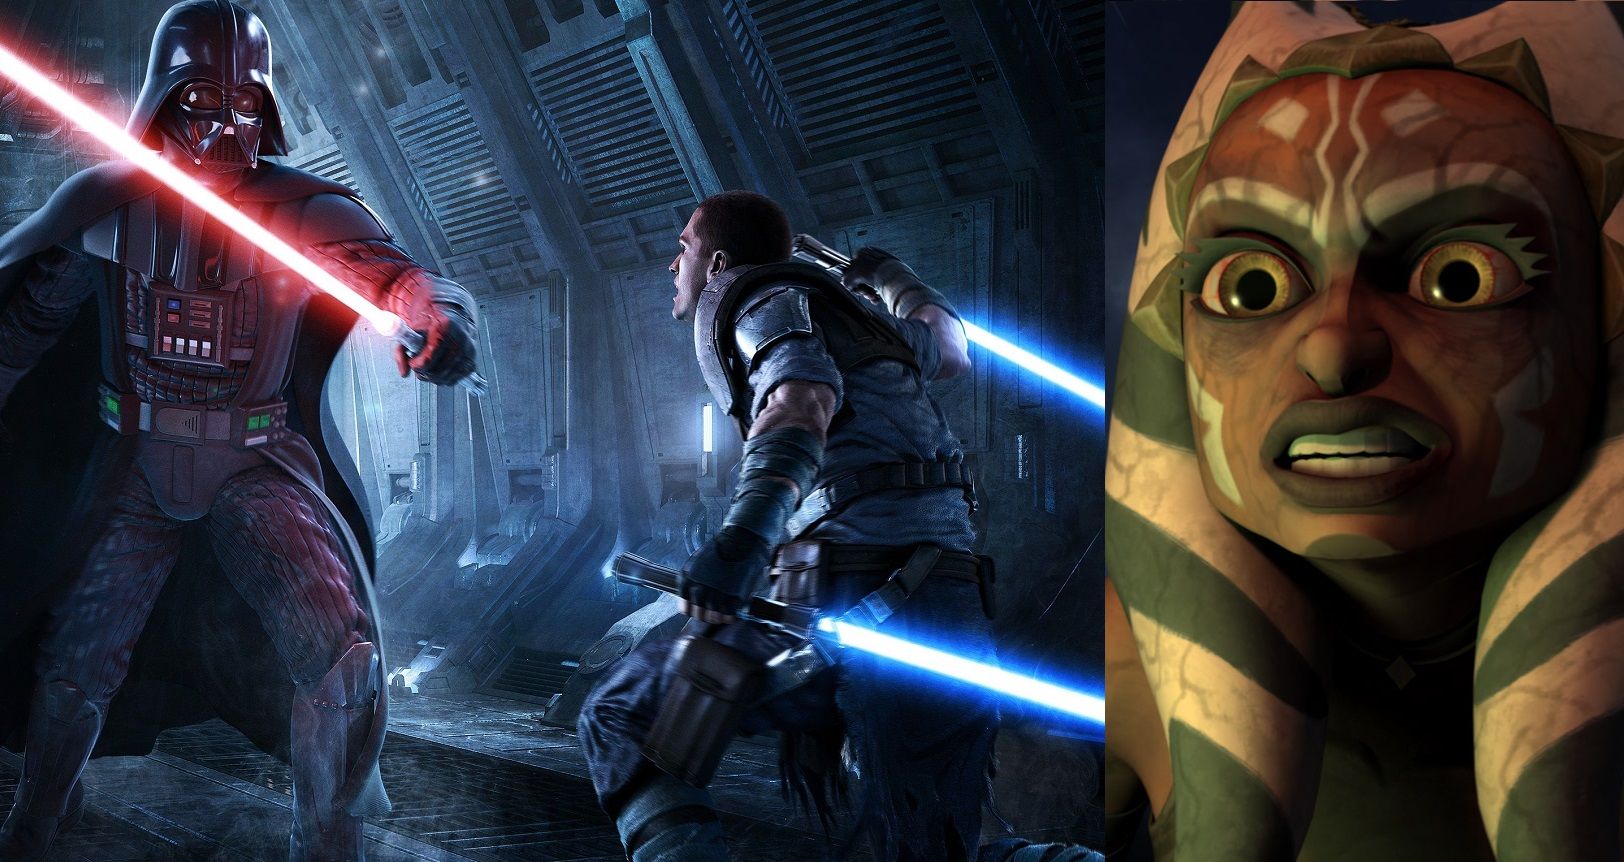 Starkiller gradually learned to oppose the dark side and Ahsoka had a short incidennt of succumbing to it.